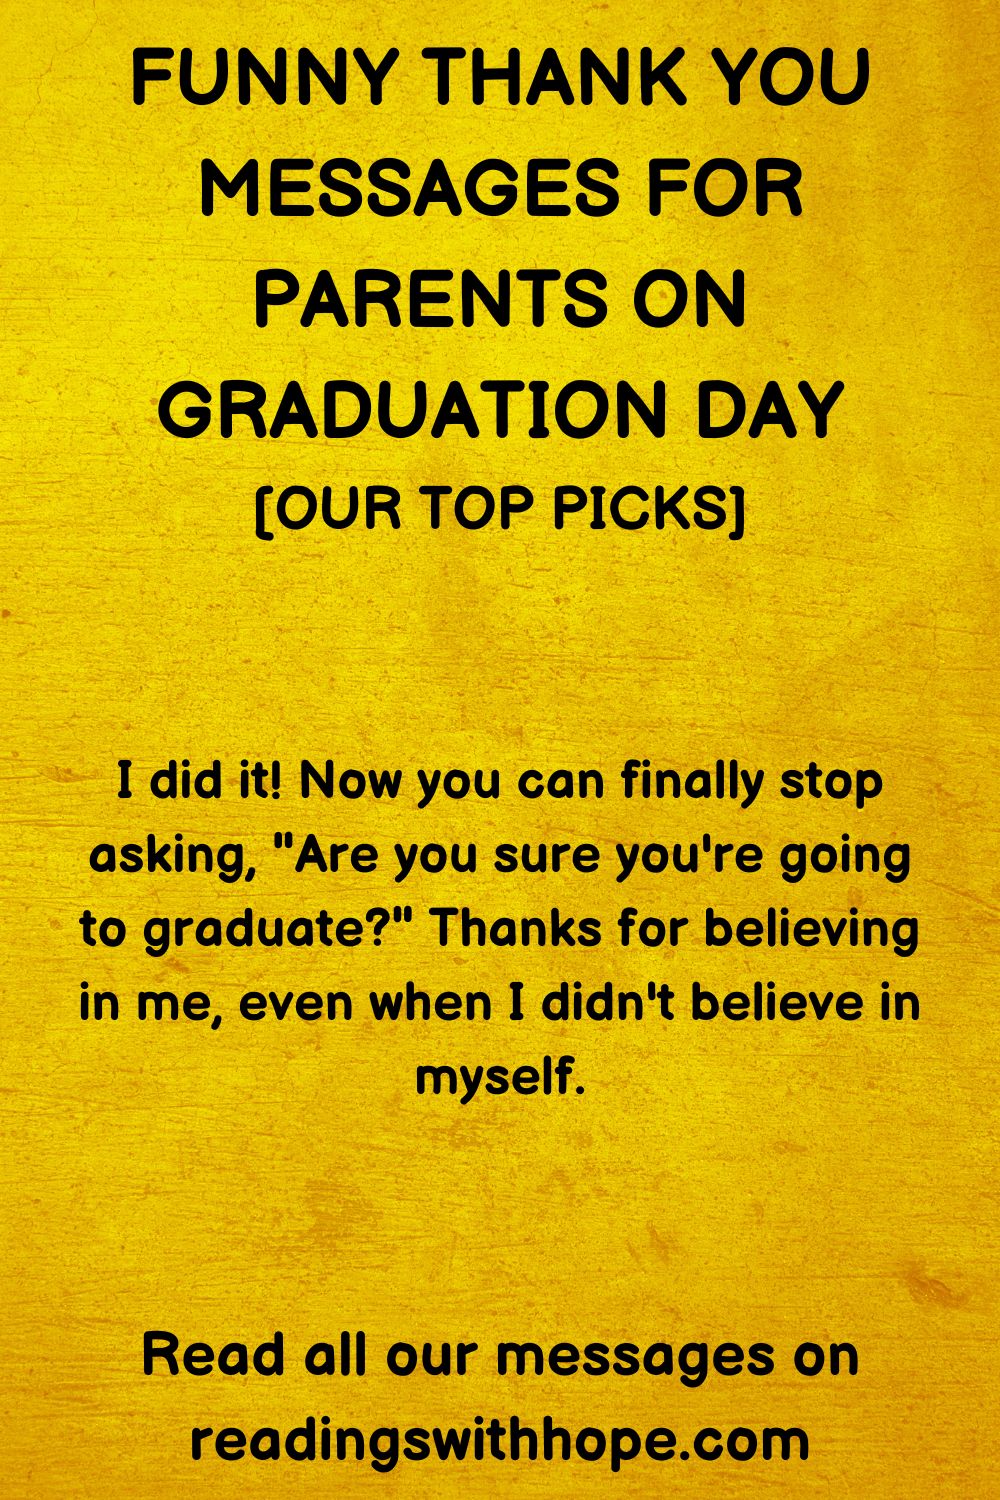 60 Thank You Messages for Parents on Graduation Day